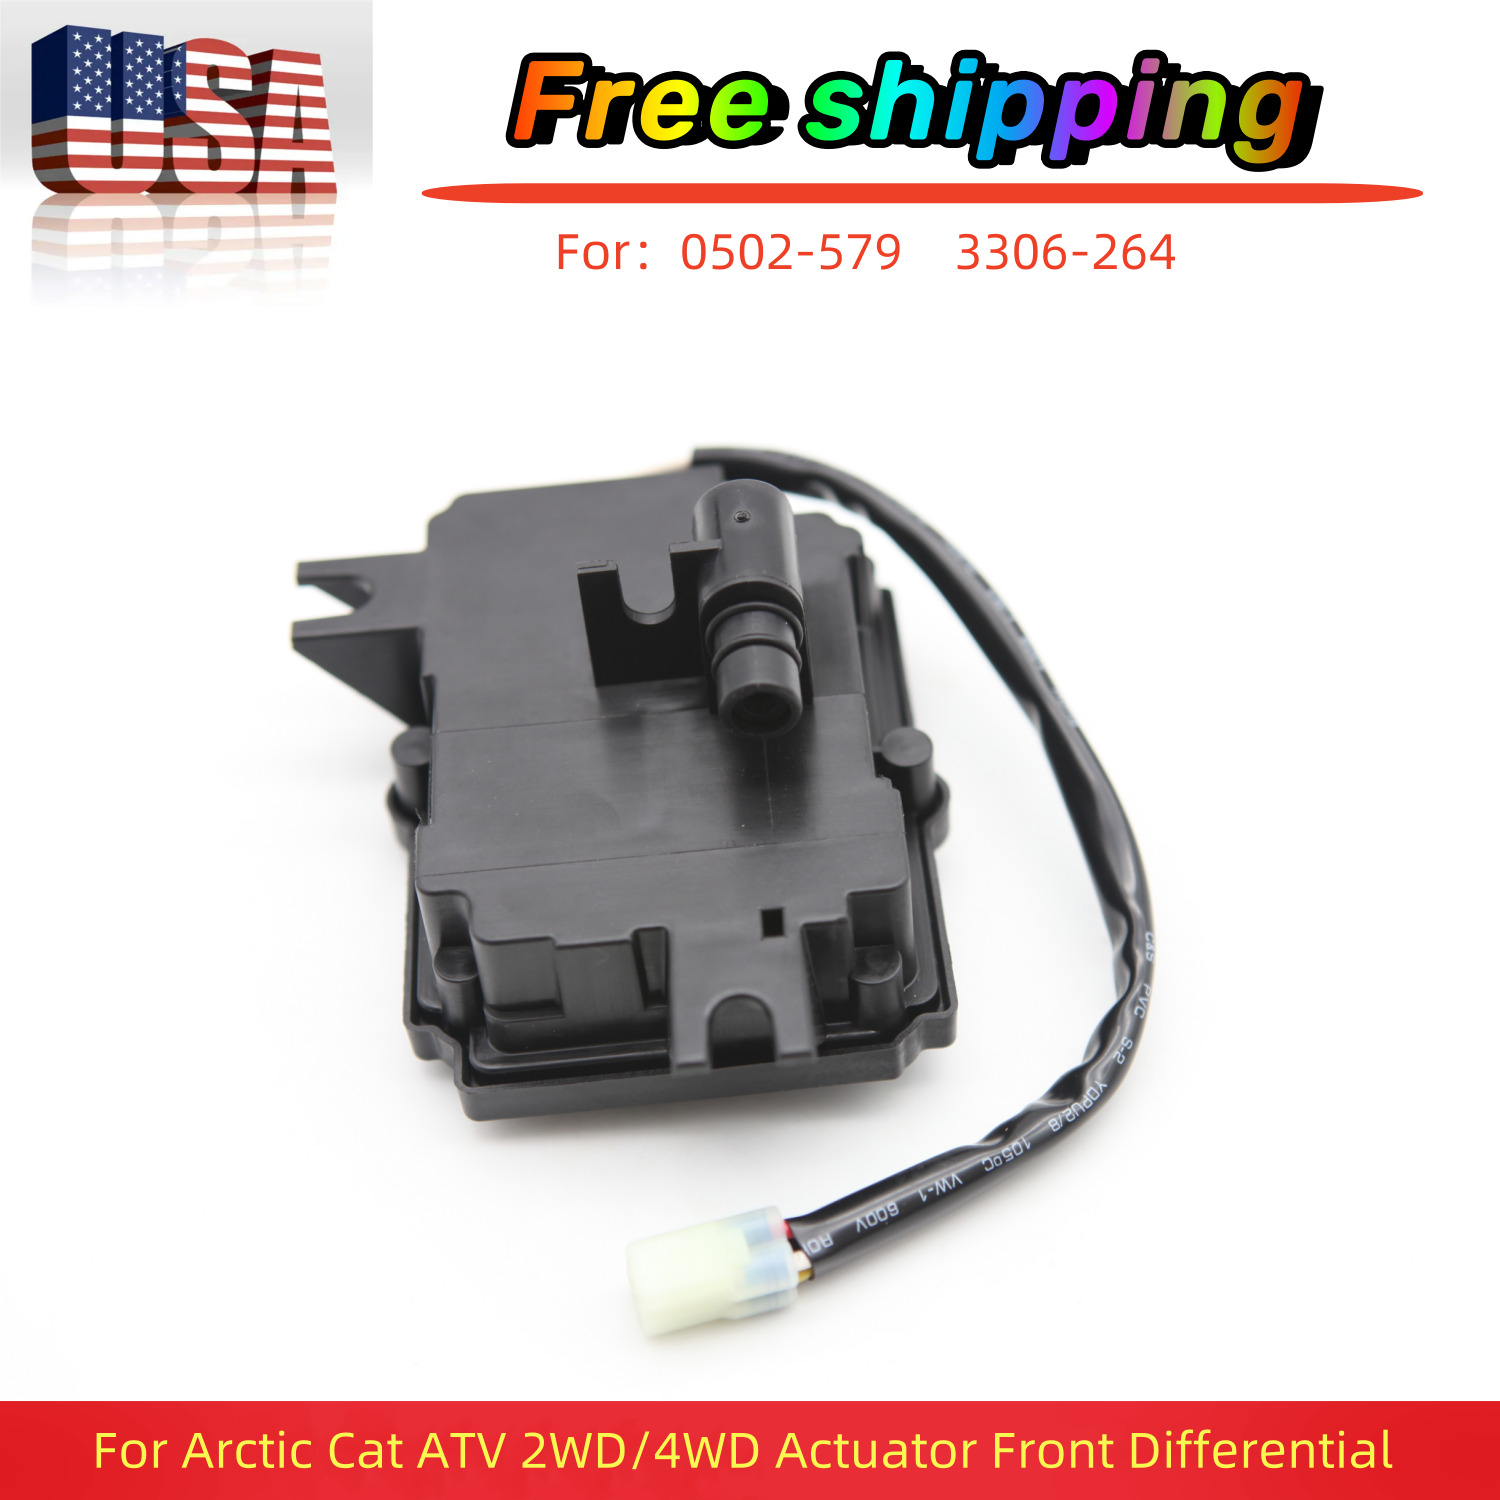 NEW For Arctic Cat ATV 2WD/4WD Actuator Front Differential  3306-264 0502-579